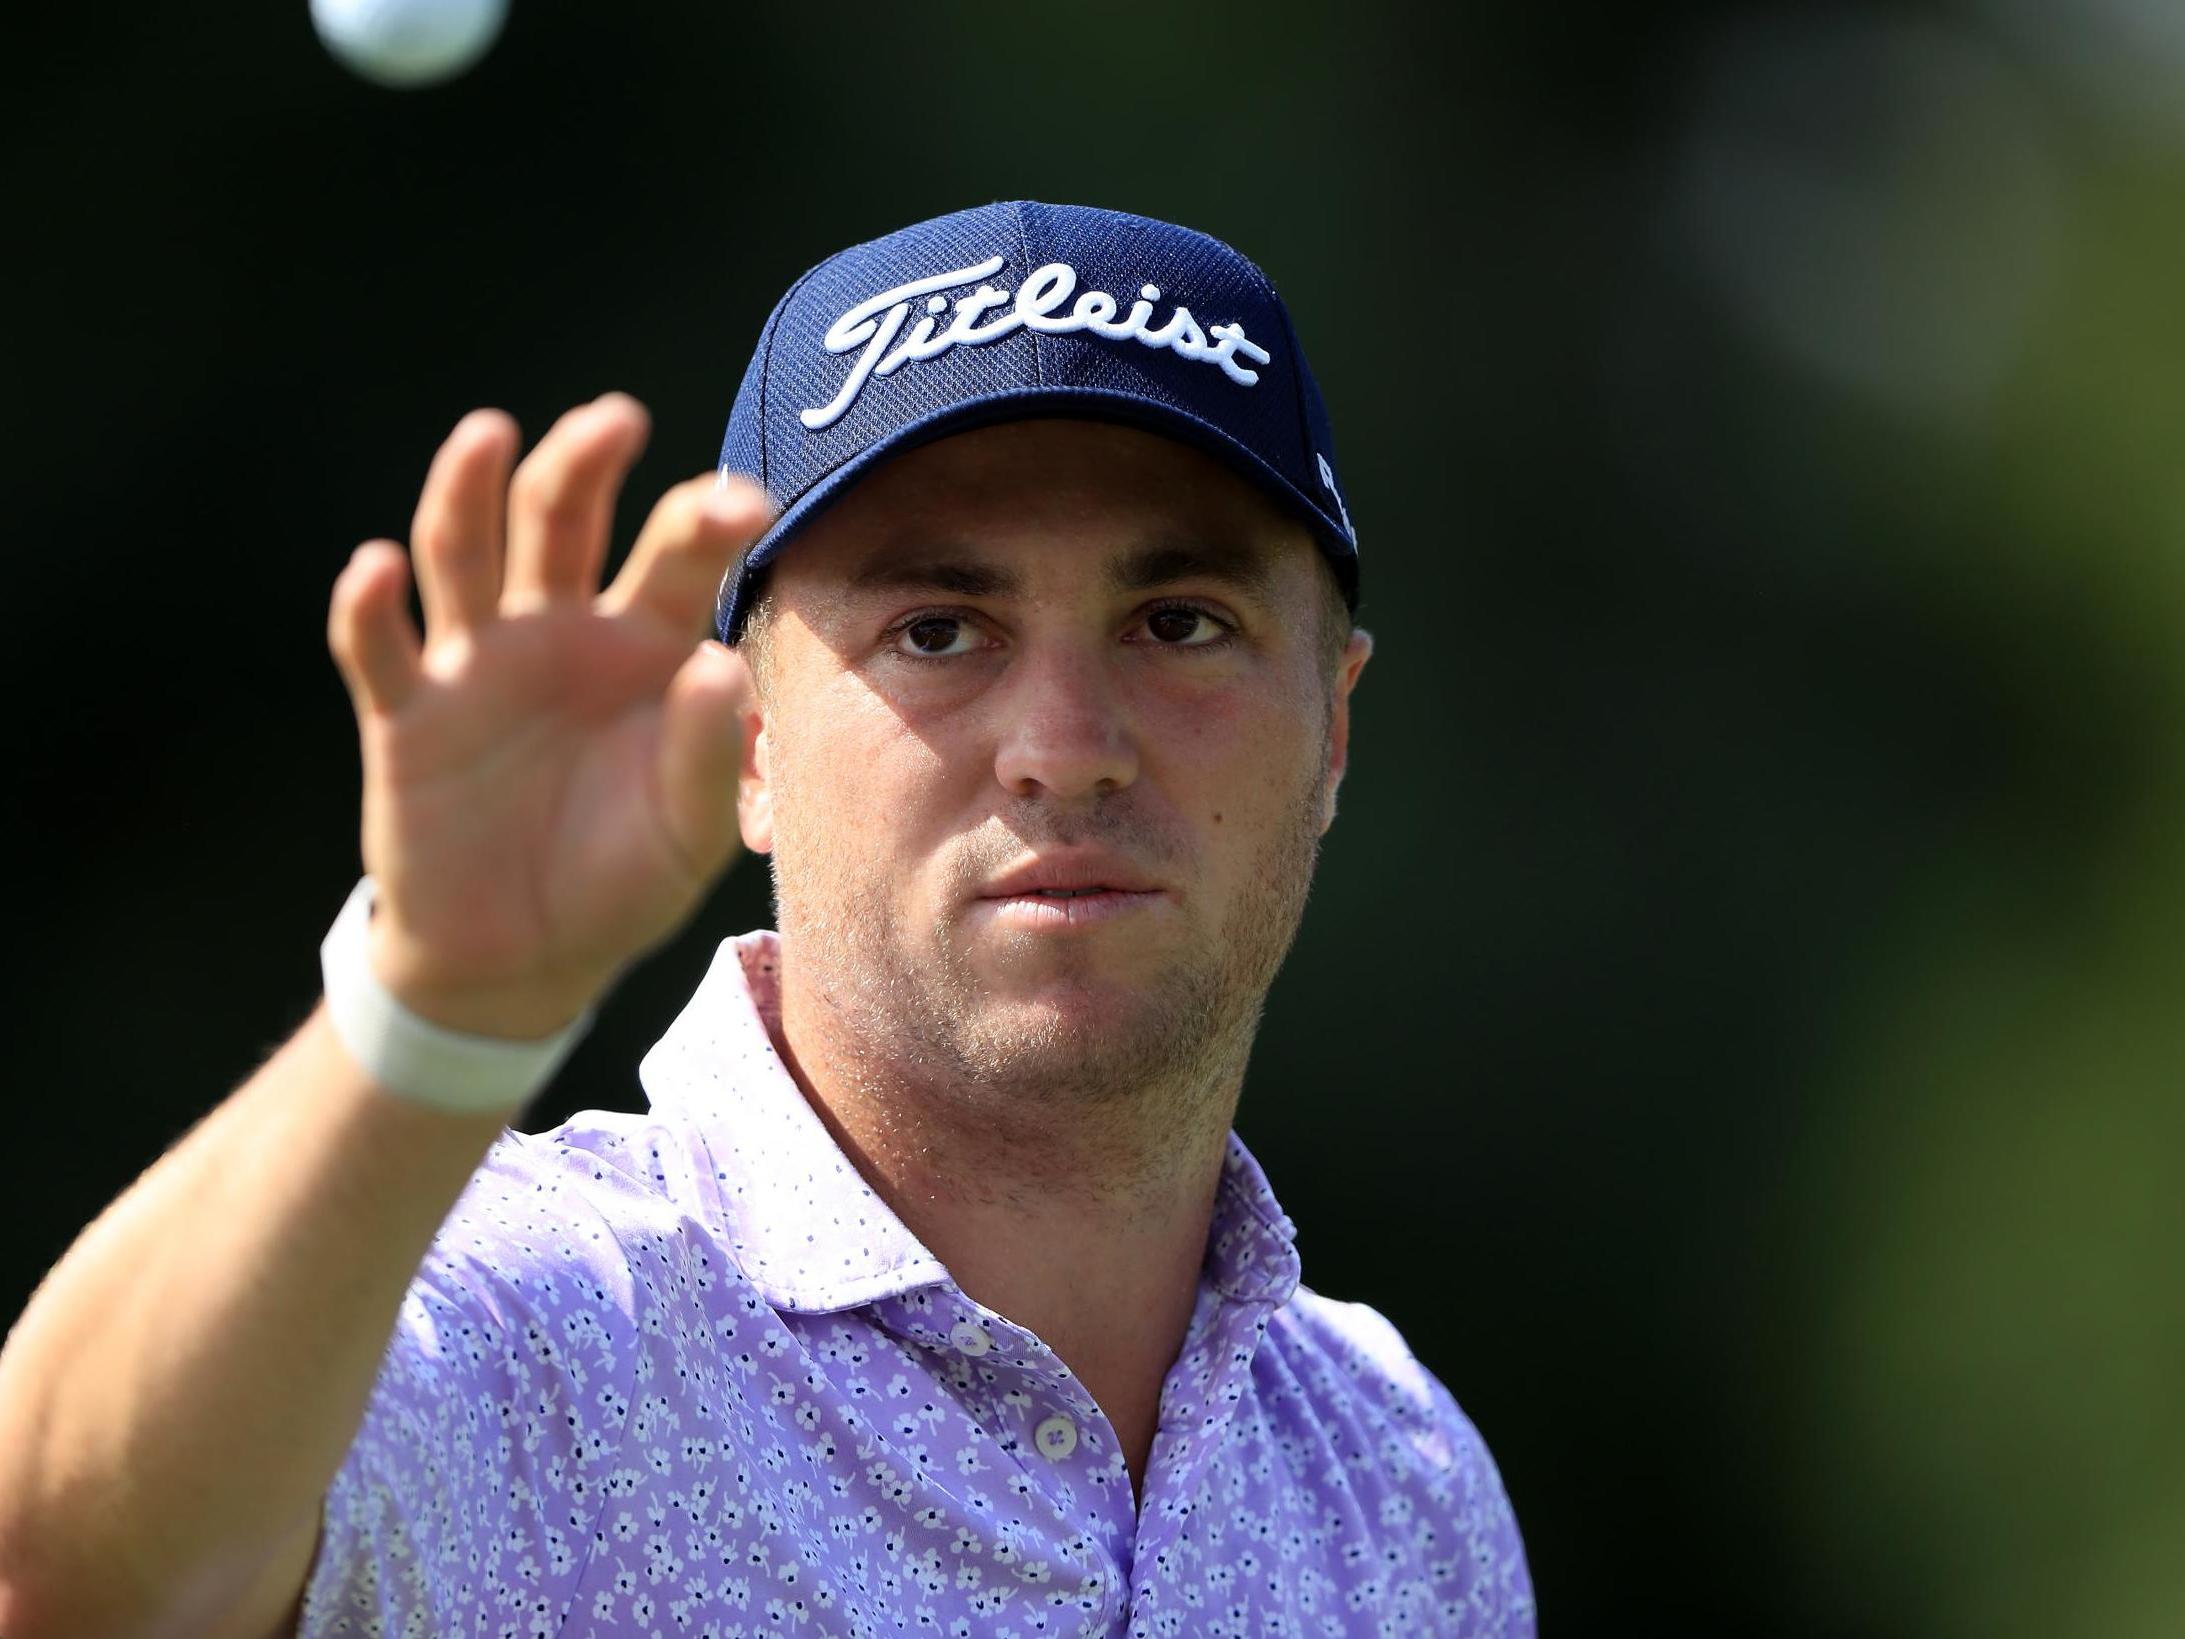 Justin Thomas leads heading into the revamped Tour Championship